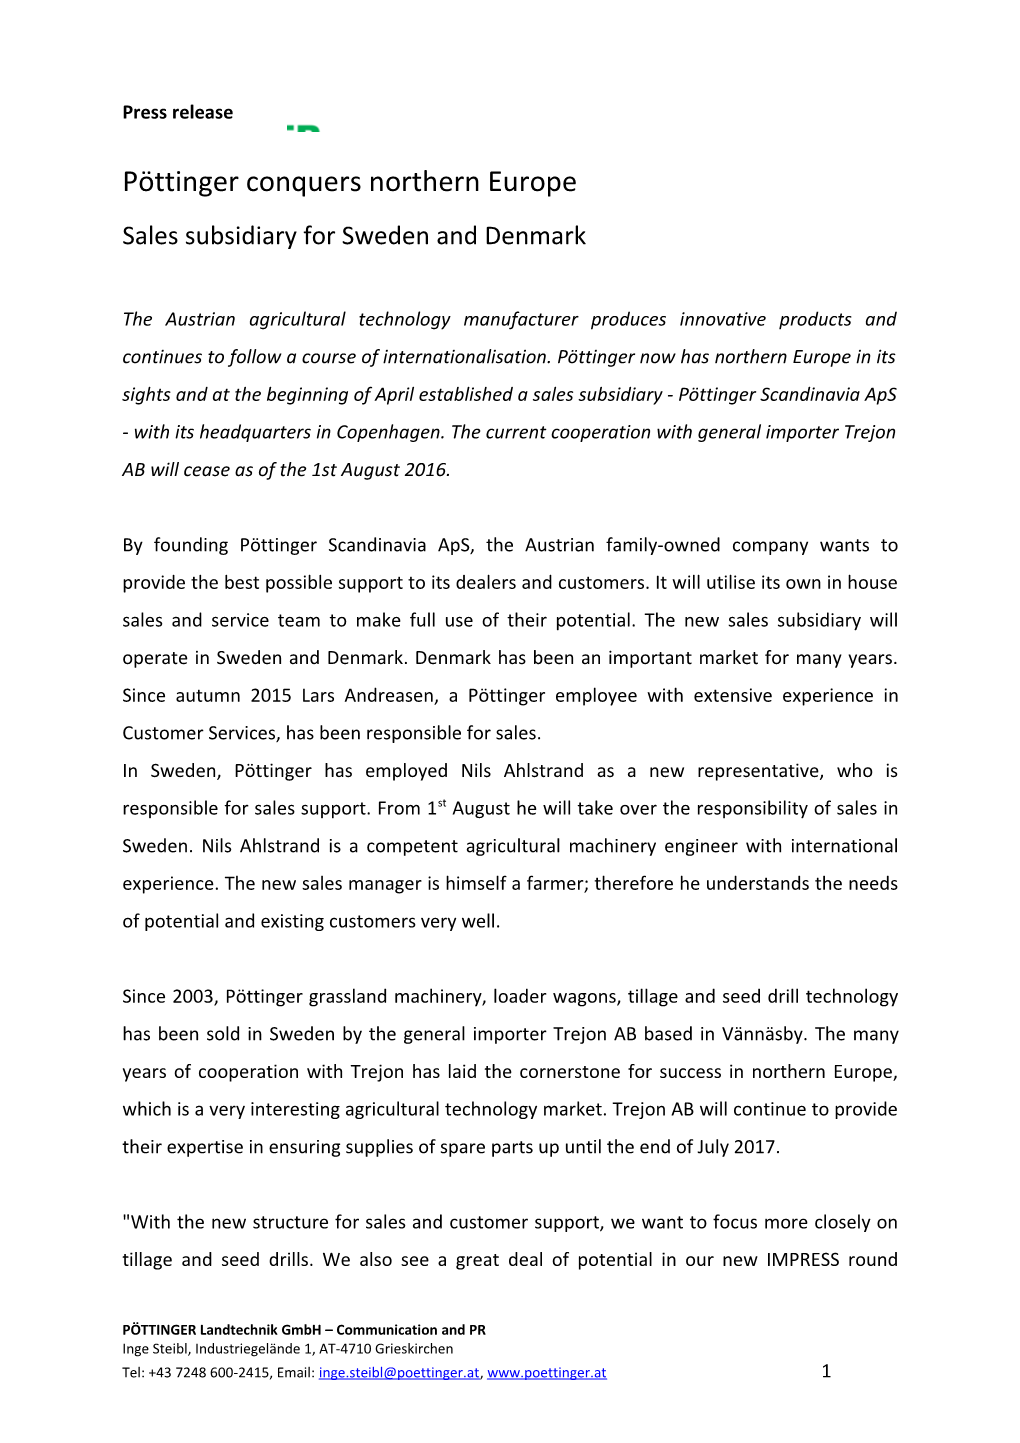 Sales Subsidiary for Sweden and Denmark